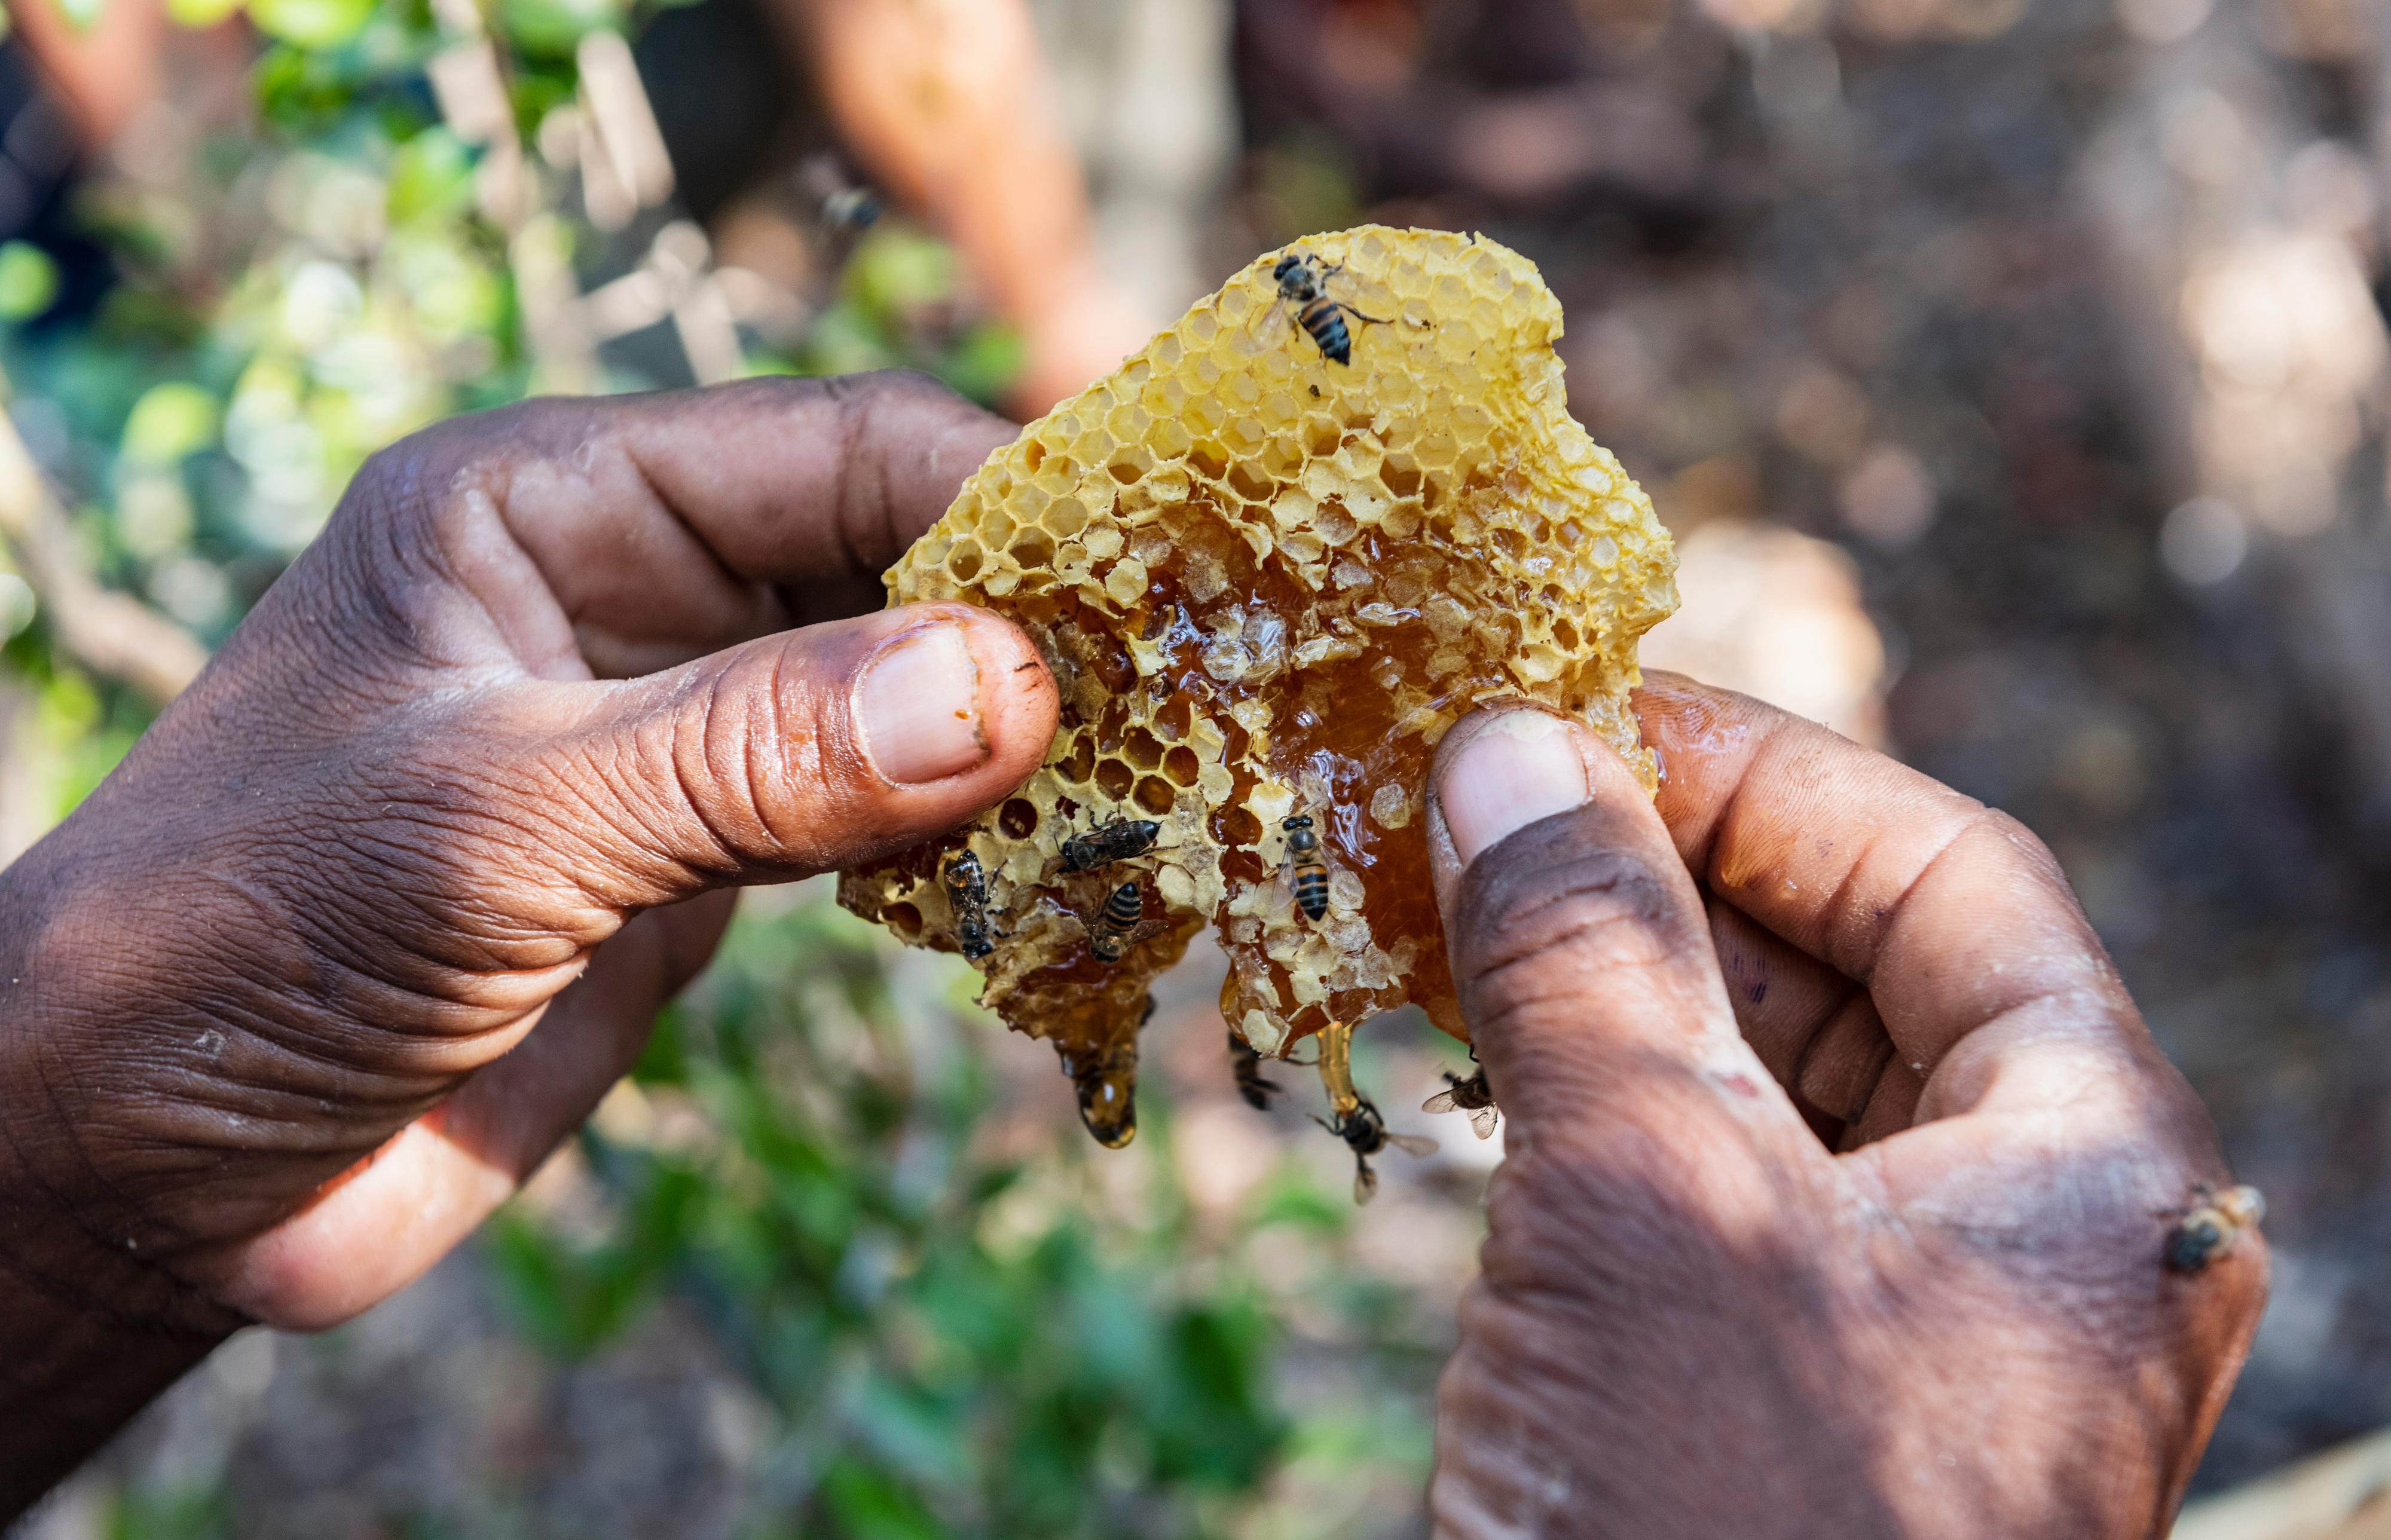 Two hands holding a piece of honey comb with bees on it